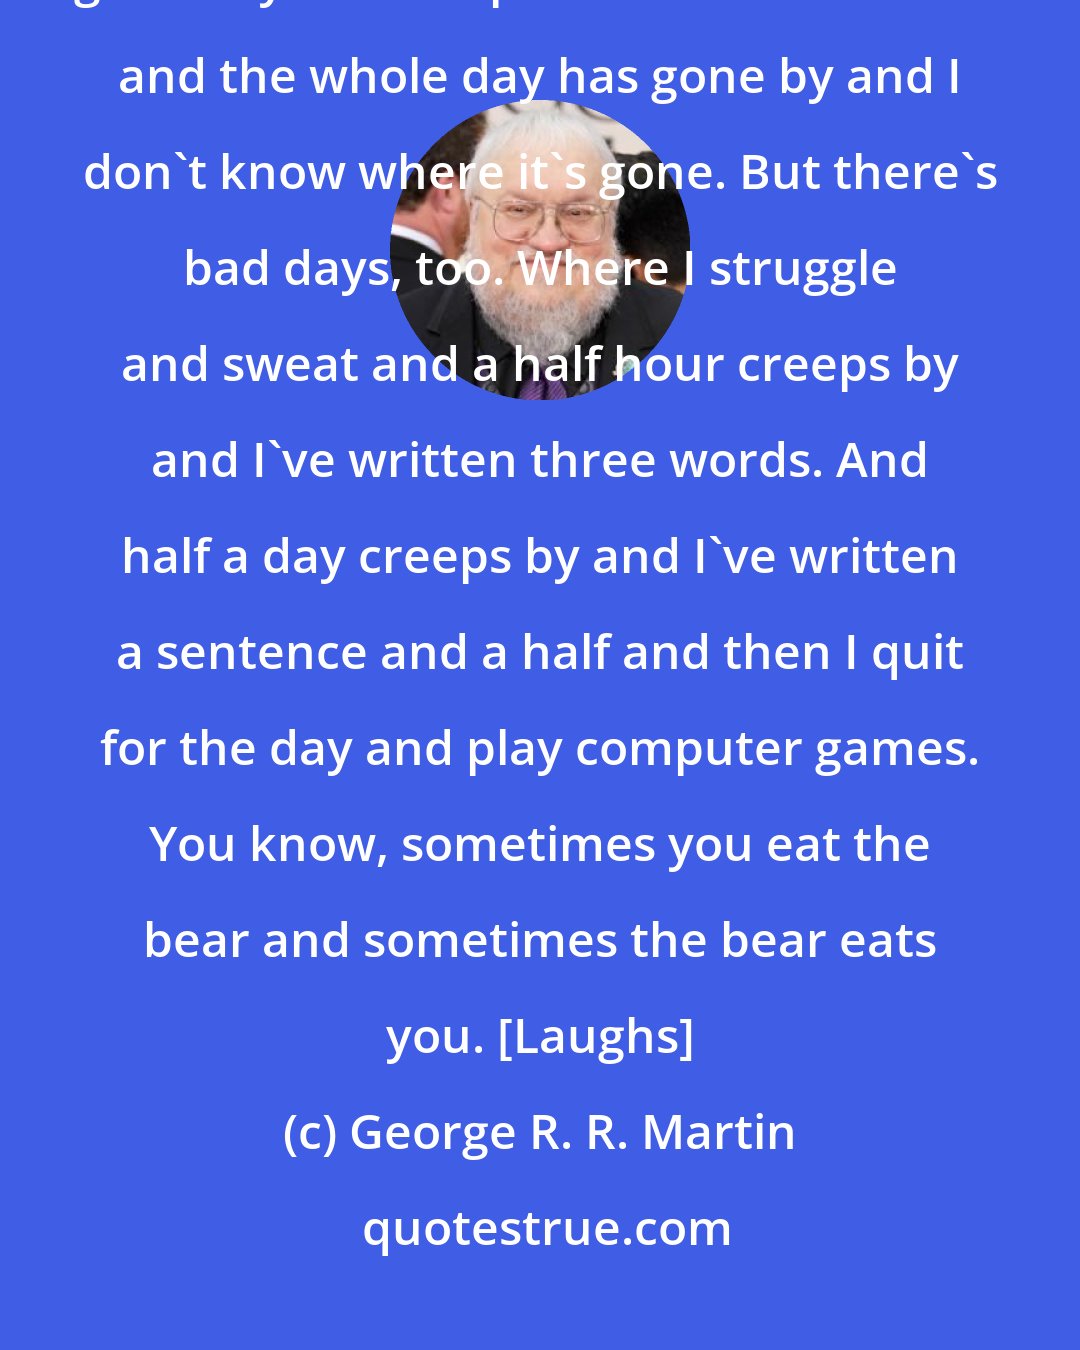 George R. R. Martin: I get up every day and work in the morning. I have my coffee and get to work. On good days I look up and it's dark outside and the whole day has gone by and I don't know where it's gone. But there's bad days, too. Where I struggle and sweat and a half hour creeps by and I've written three words. And half a day creeps by and I've written a sentence and a half and then I quit for the day and play computer games. You know, sometimes you eat the bear and sometimes the bear eats you. [Laughs]